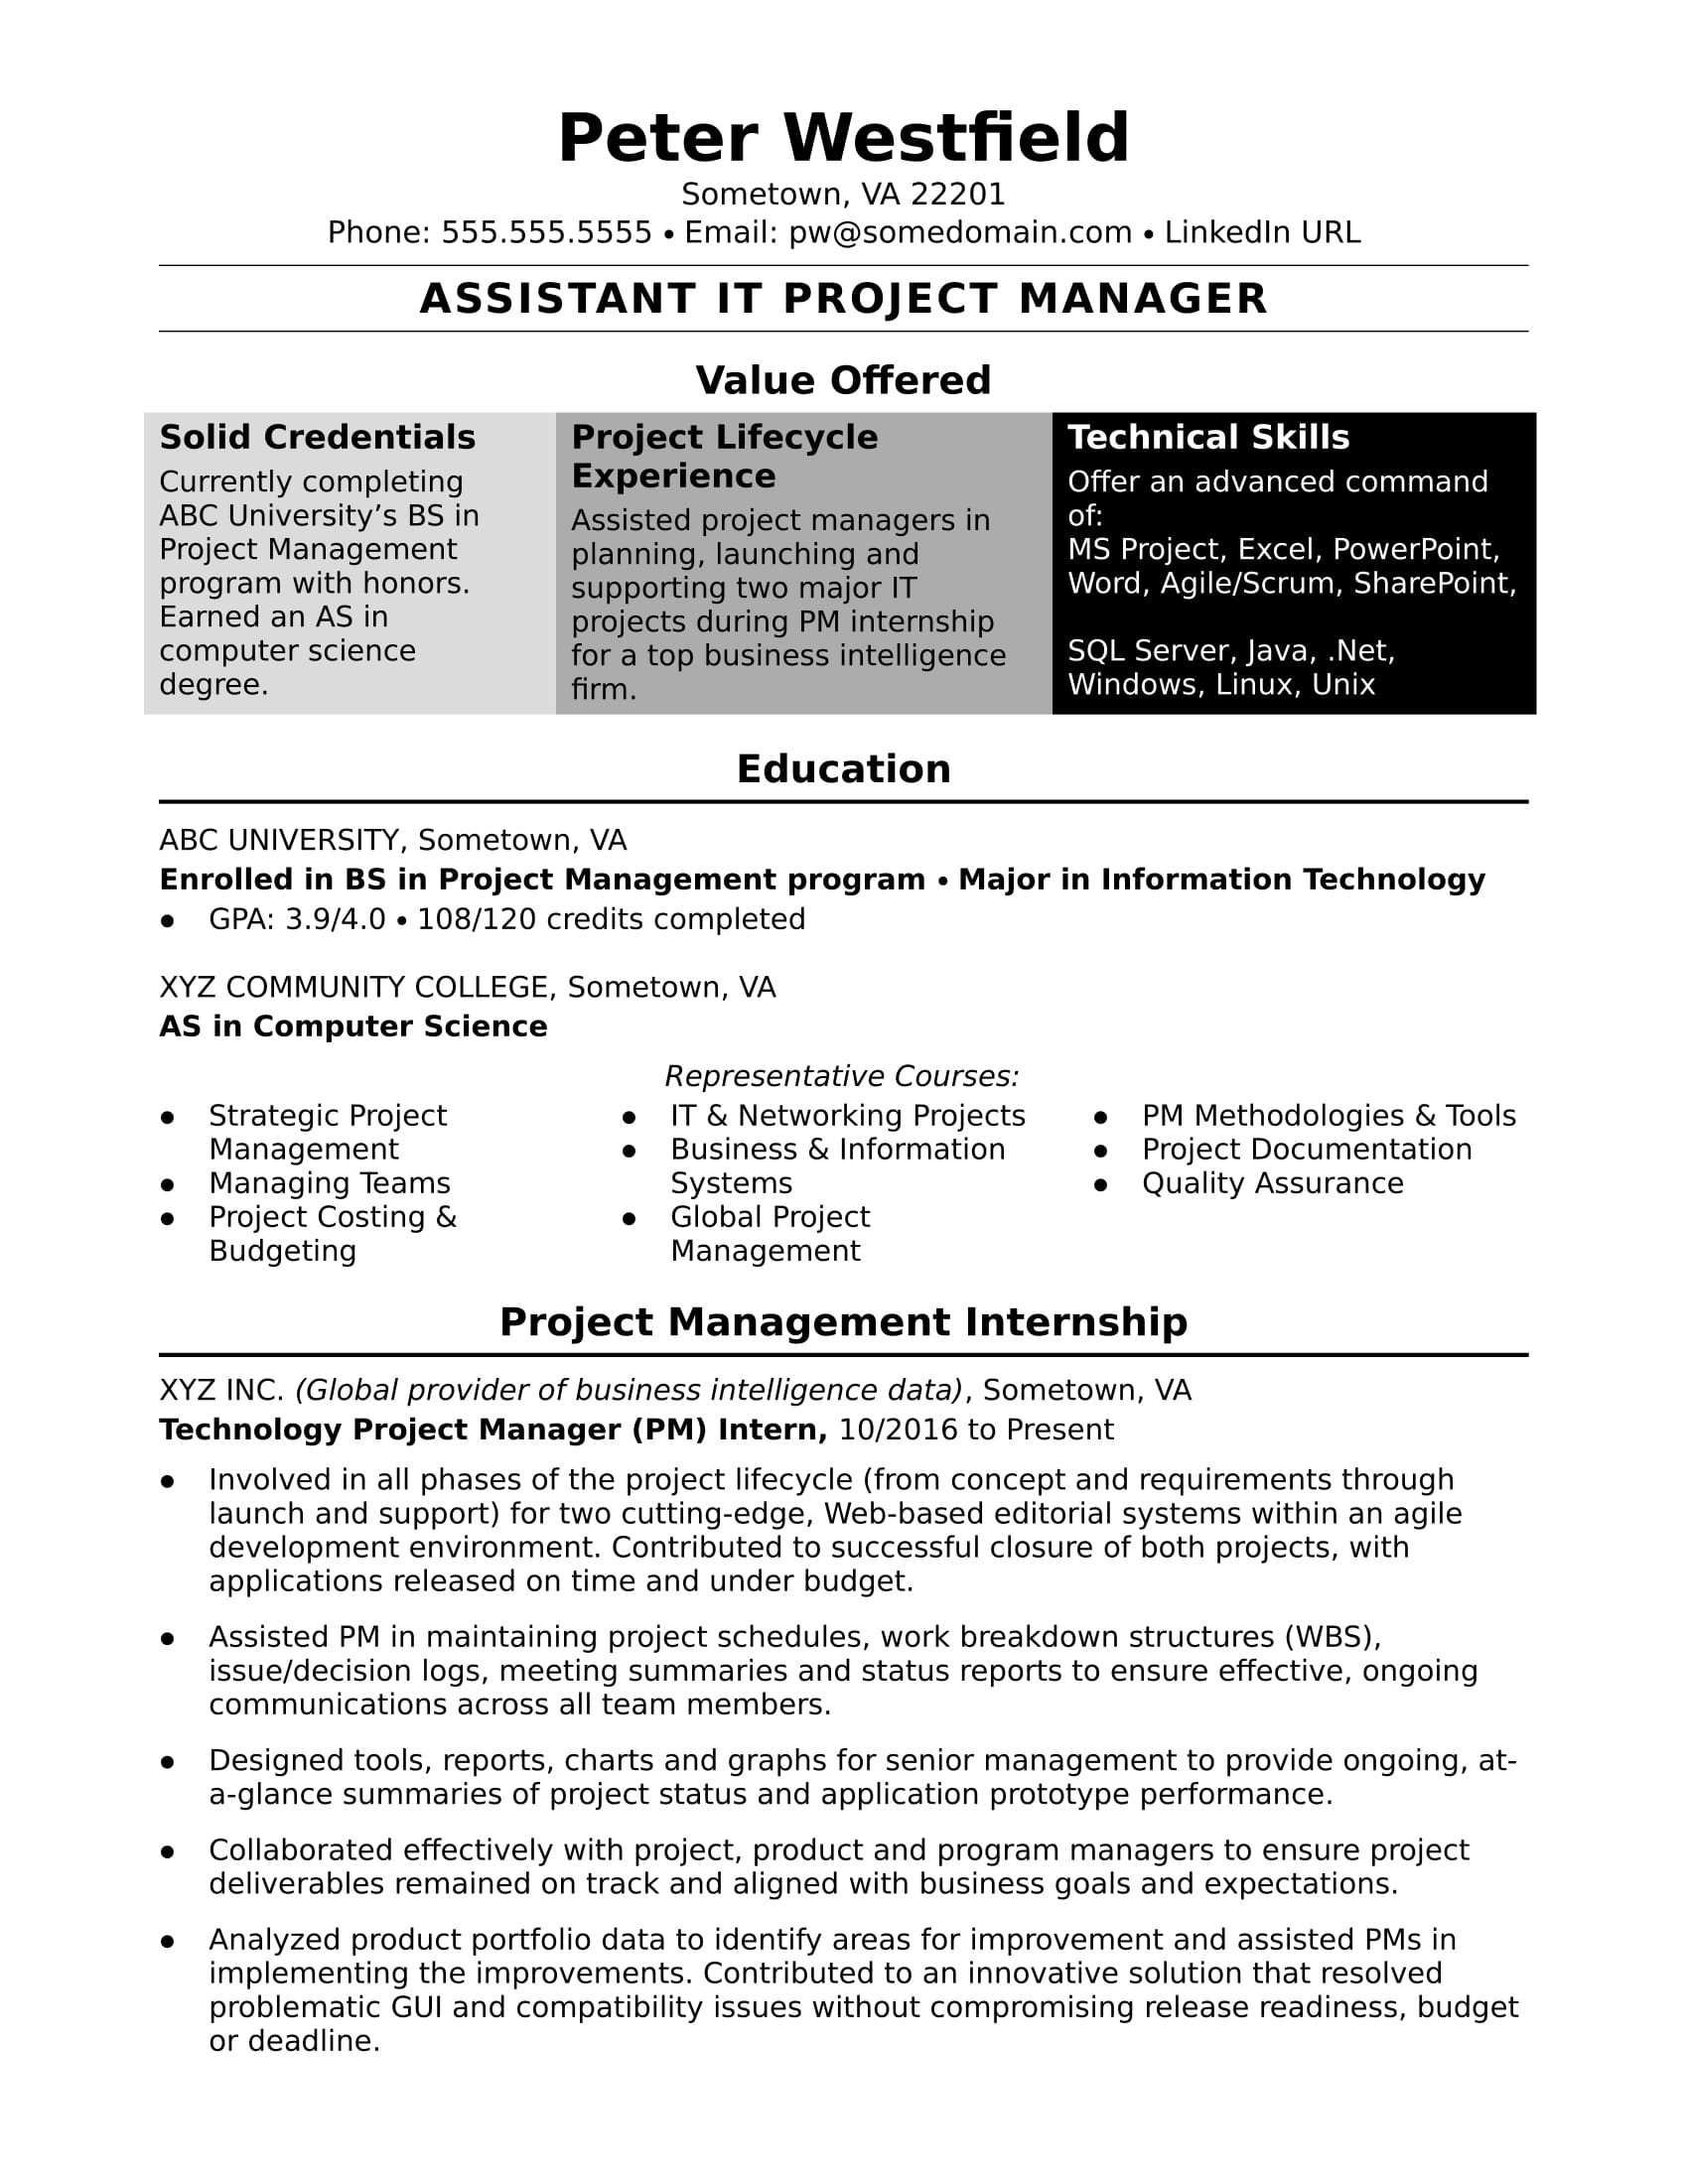 Sample Of Resume Of Project Manager Sample Resume for An assistant It Project Manager Monster.com